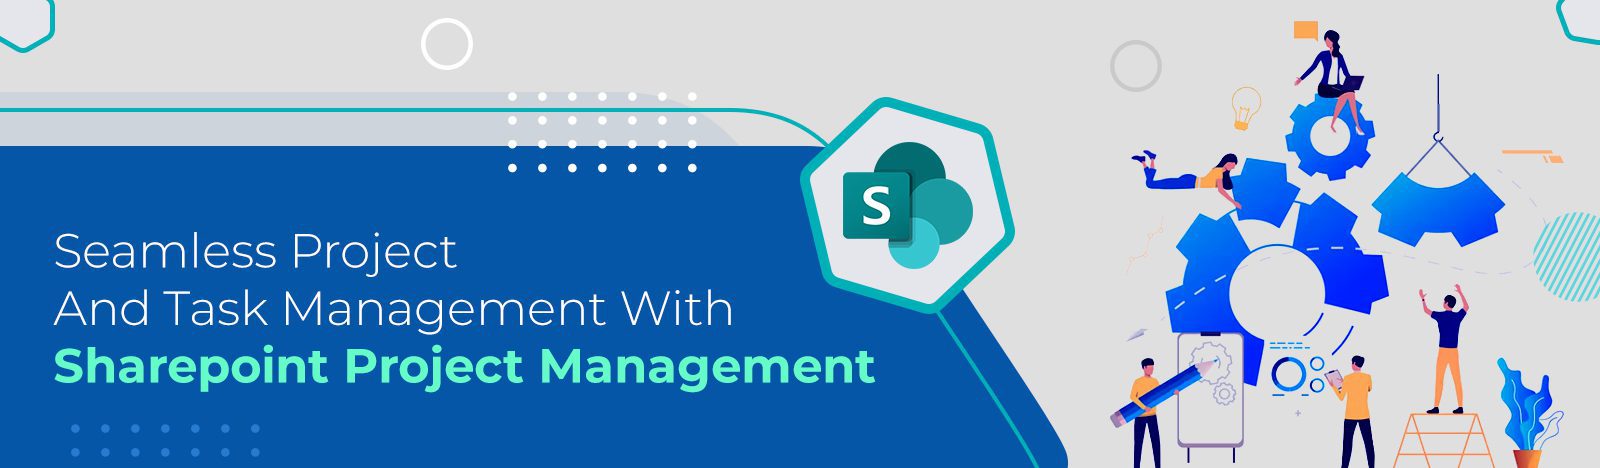 Seamless Project and task management with SharePoint project management